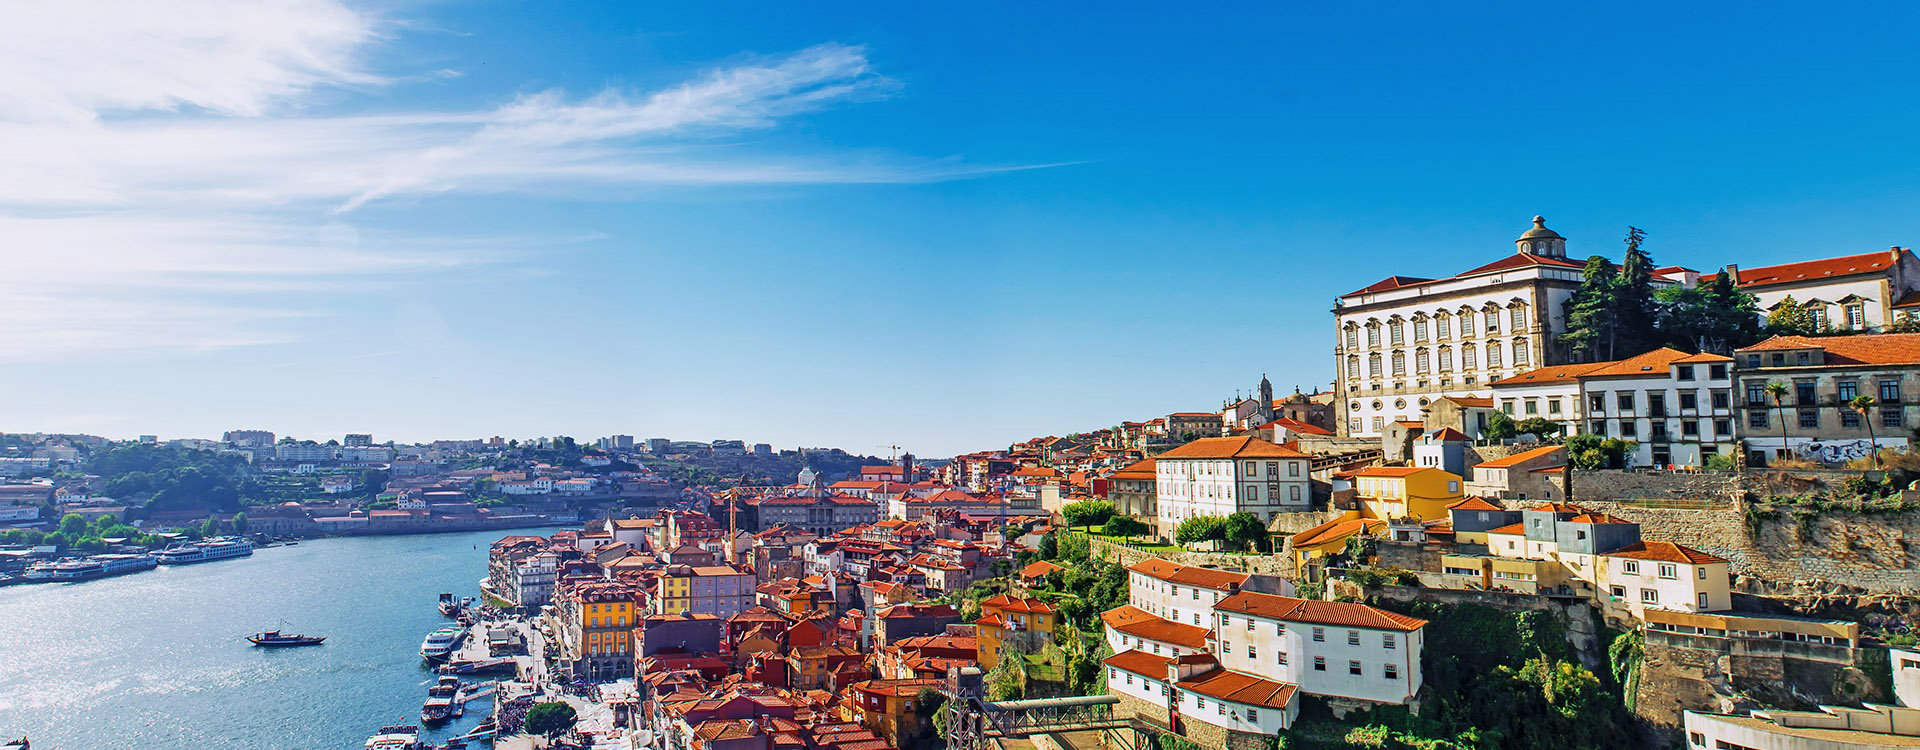 Porto, Portugal old town skyline from Dom Luis bridge on the Douro River